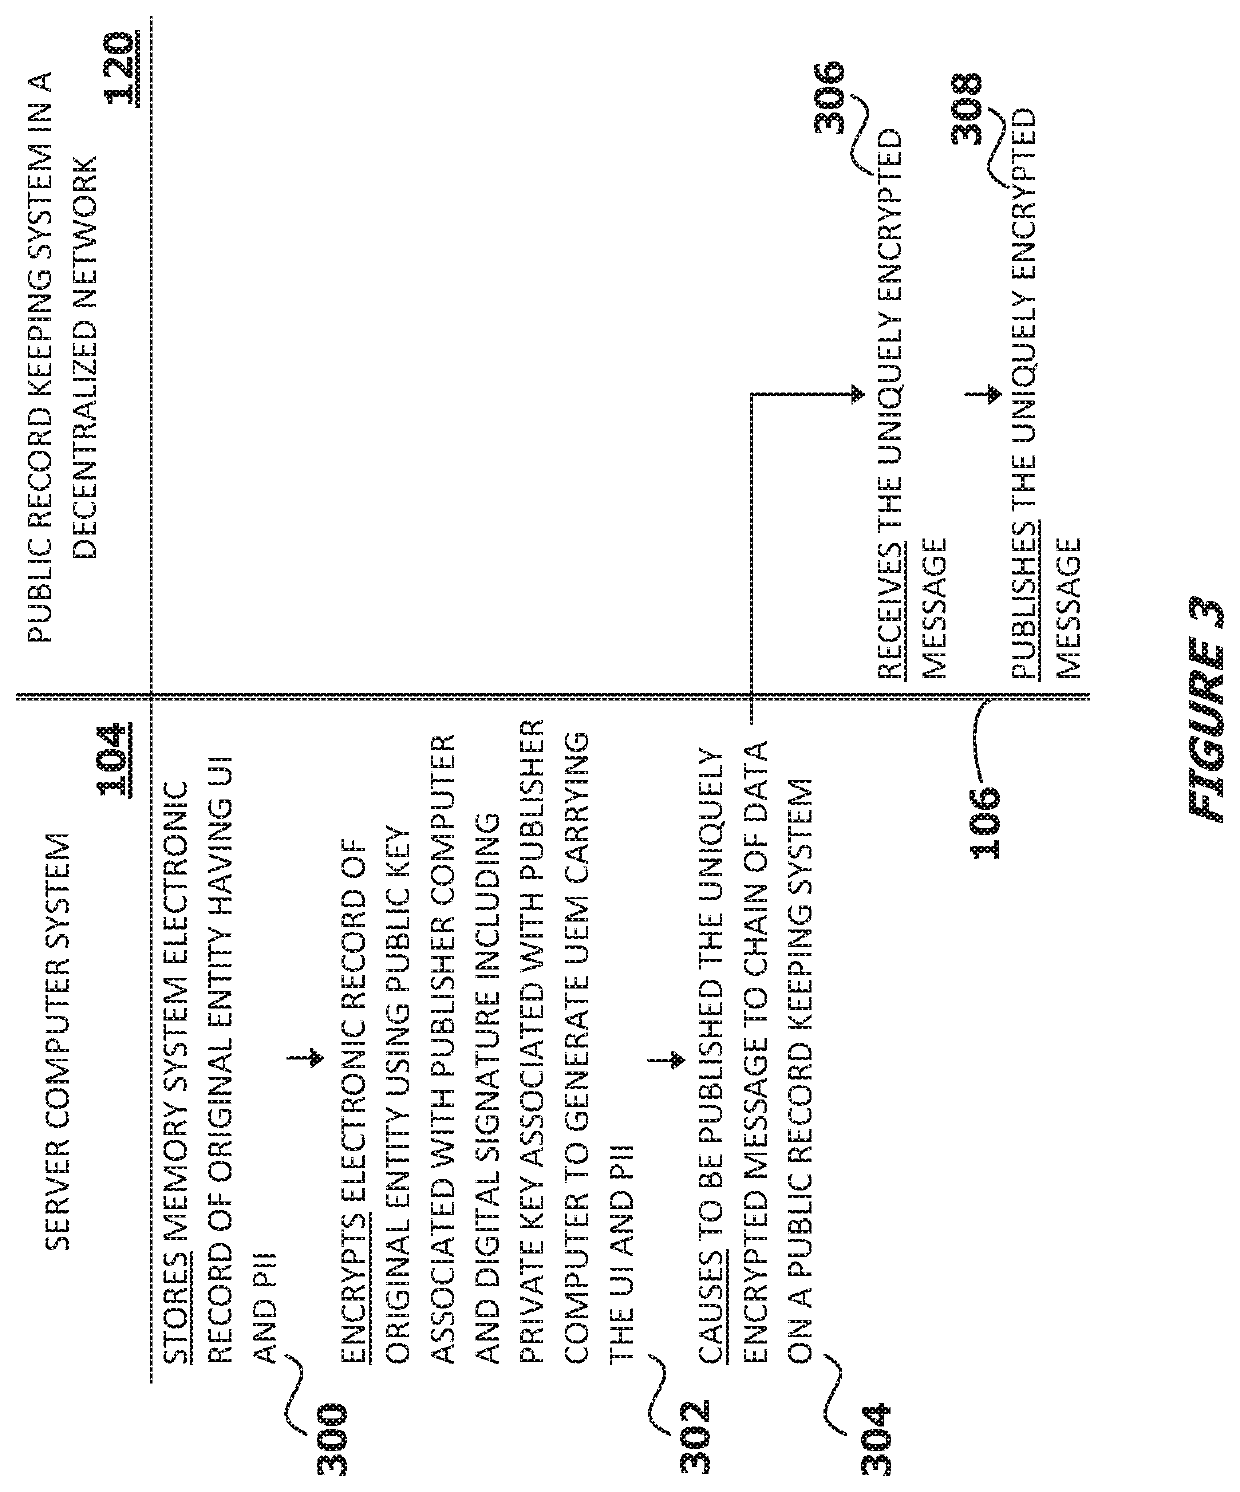 System for, method of, and server computer system for implementing transformation of an original entity into a verifiably authenticable entity in a heterogeneous communications network environment